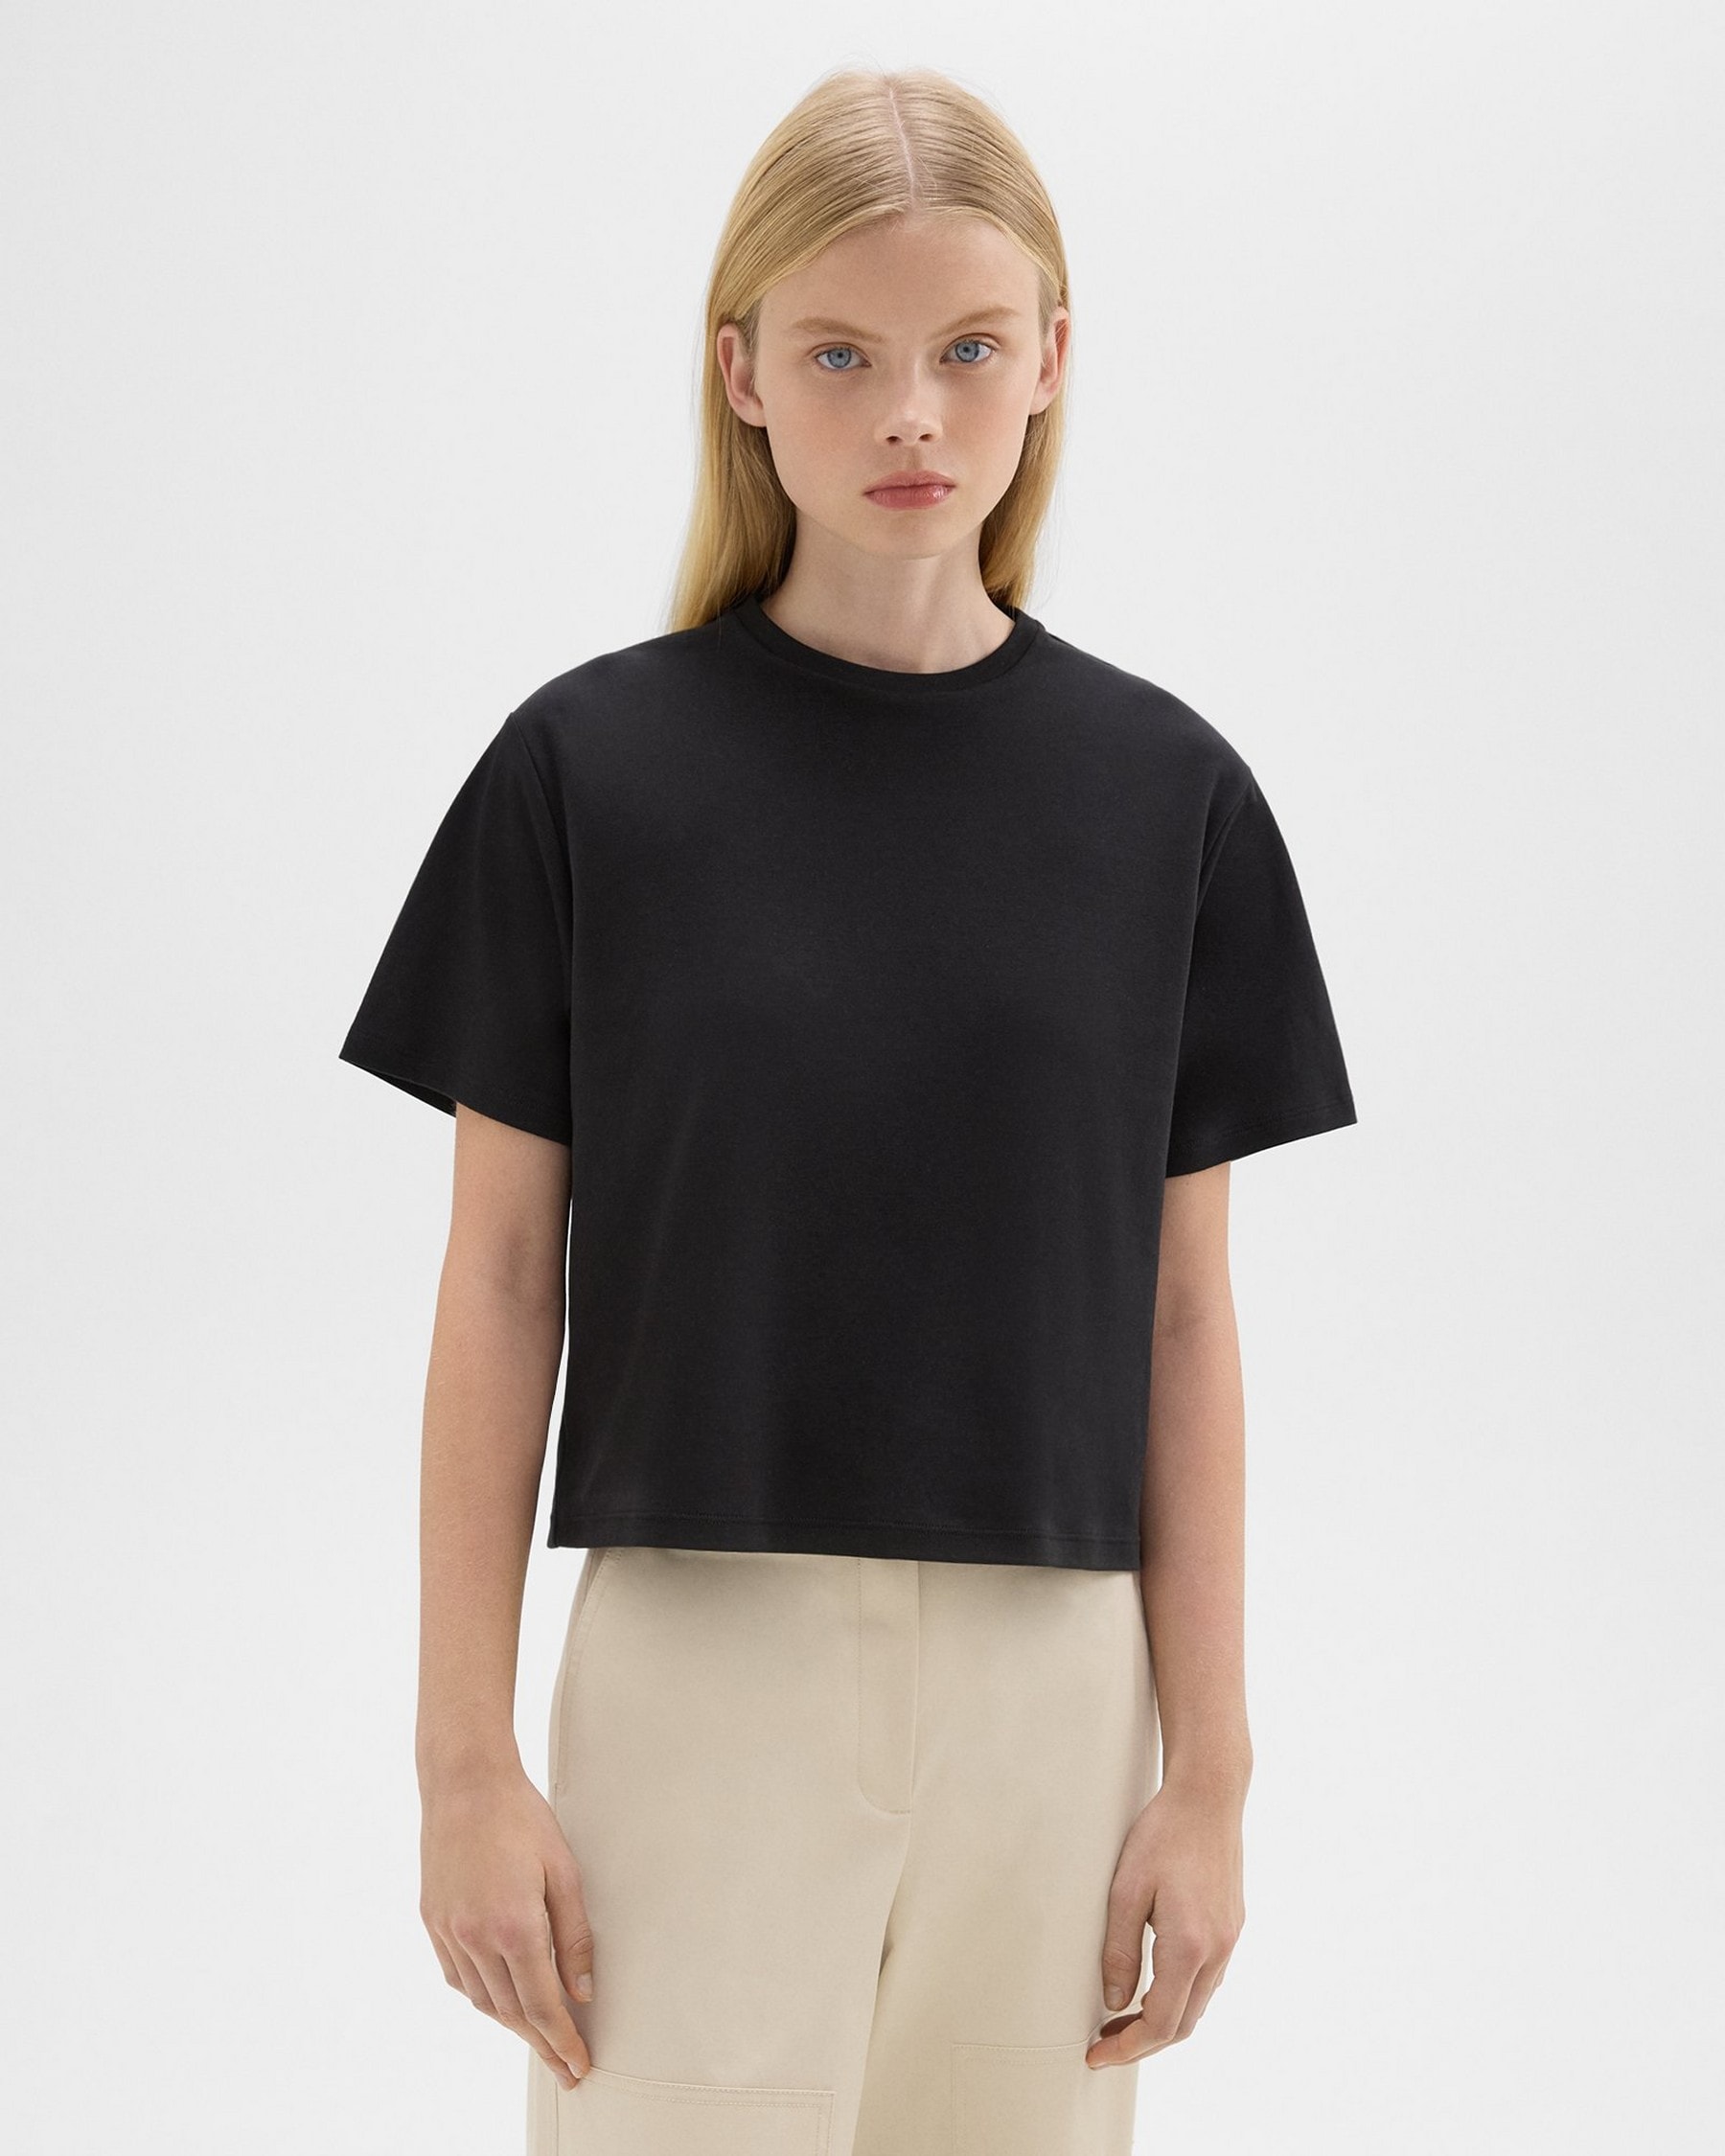 Boxy Tee in Cotton Jersey